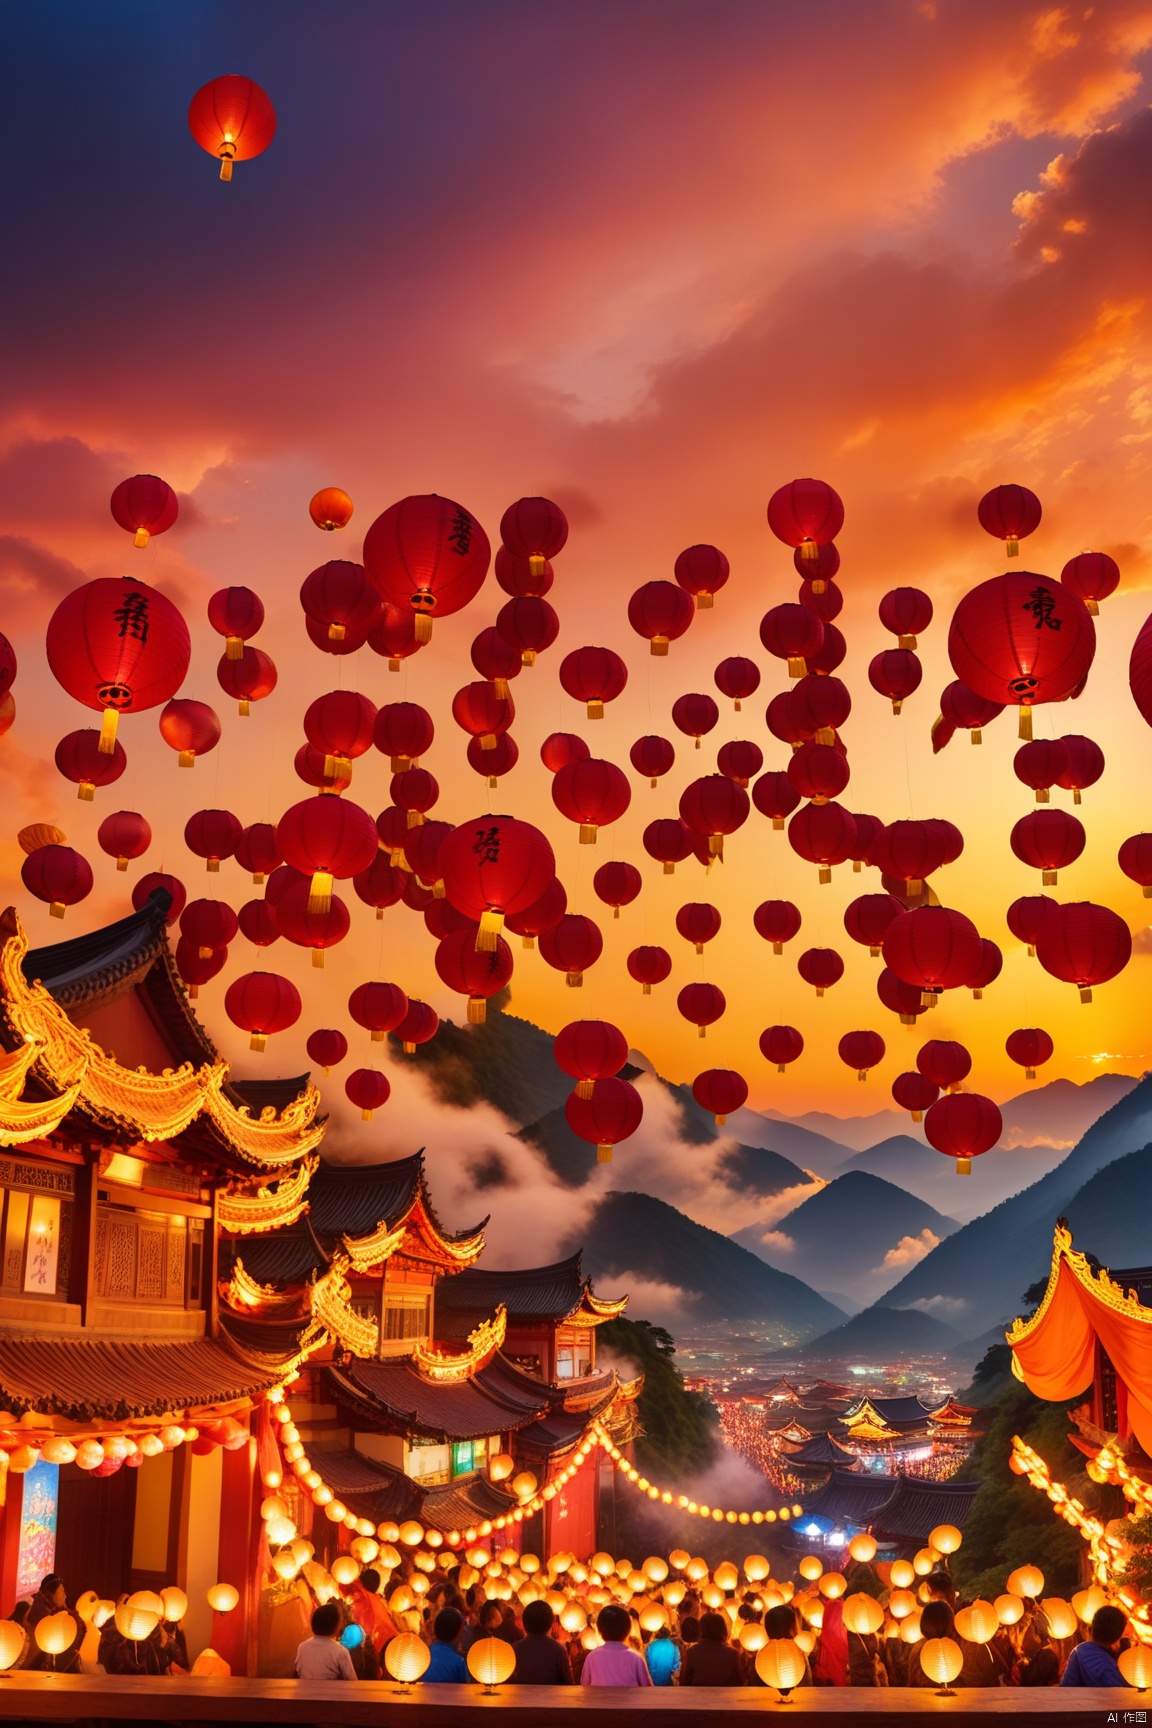 Large panorama, Kongming lanterns flying all over the sky at sunset, close-up of Kongming lanterns, huge Kongming lantern balls hanging people's dreams and hopes, the background is the charming colorful clouds and mountains. Kongming lanterns dance in the sky, setting off a spectacular scene and giving people a visual impact. 32k resolution, large aperture, backlight shooting, freedom, dream.